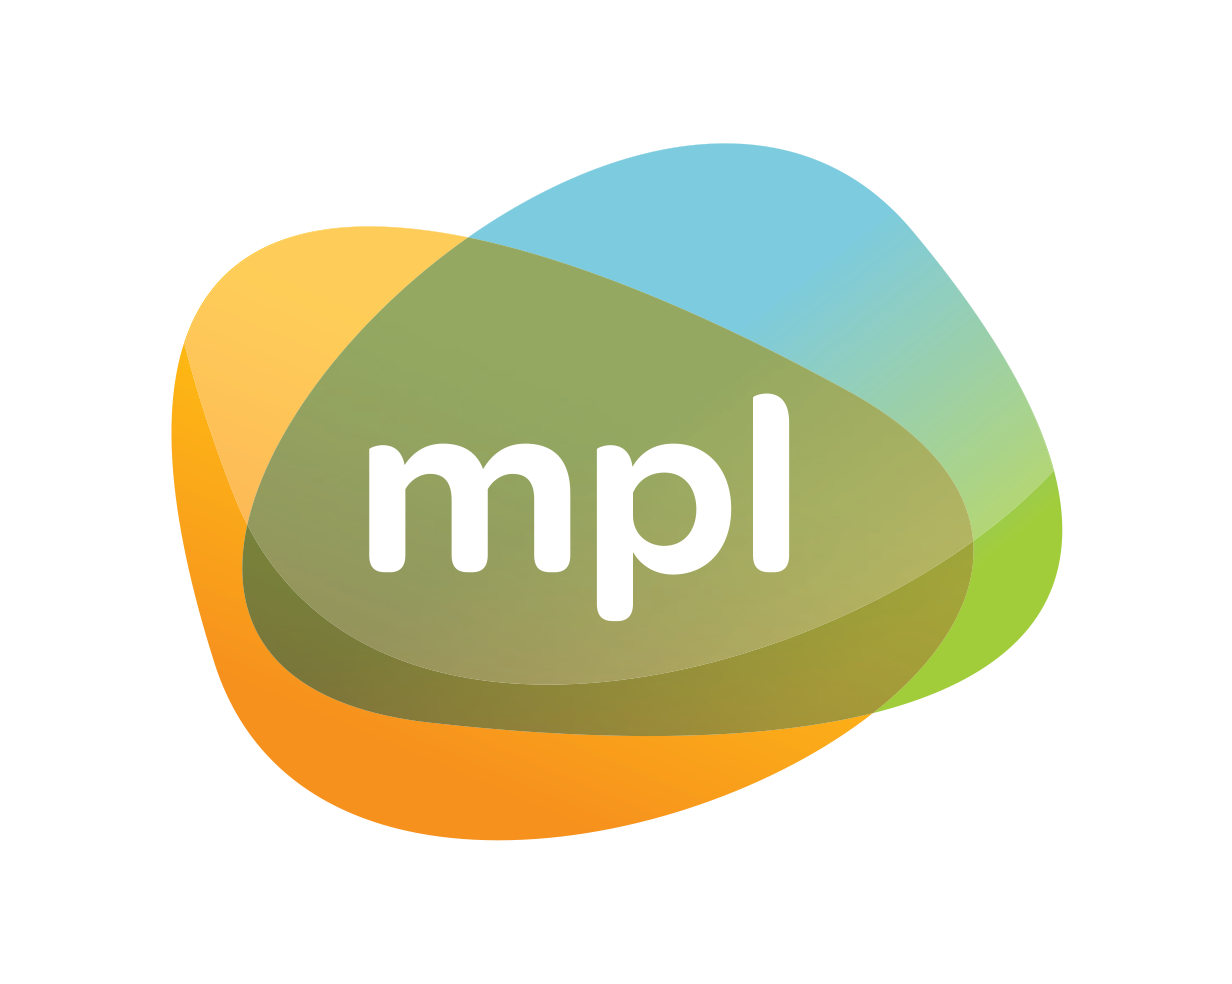 Mobile Premier League, MPL India, Game Lost Protection Policy IT News,  Technology News, Digital Terminal